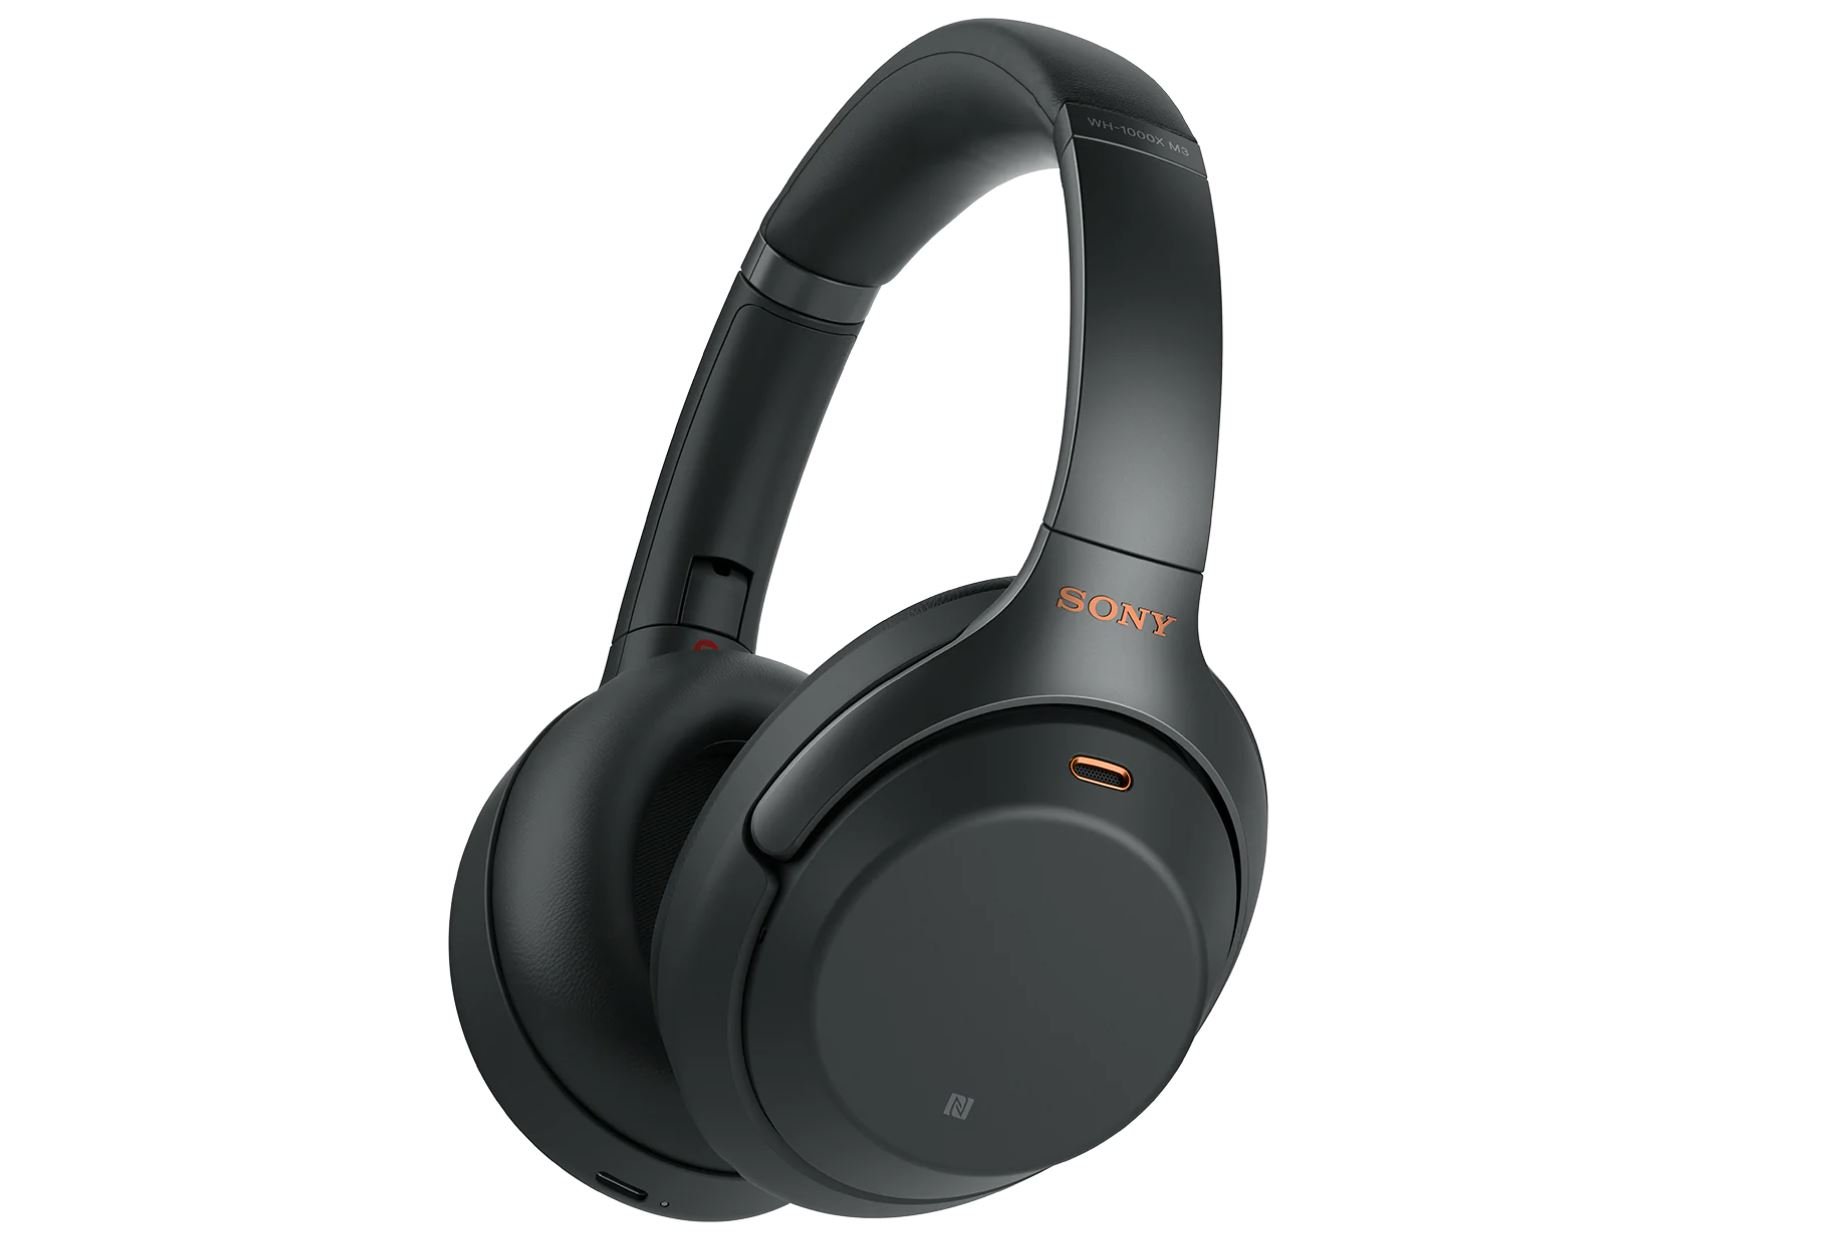 Features of the upcoming Sony WH-1000XM4 wireless headphones leaked online  - MSPoweruser